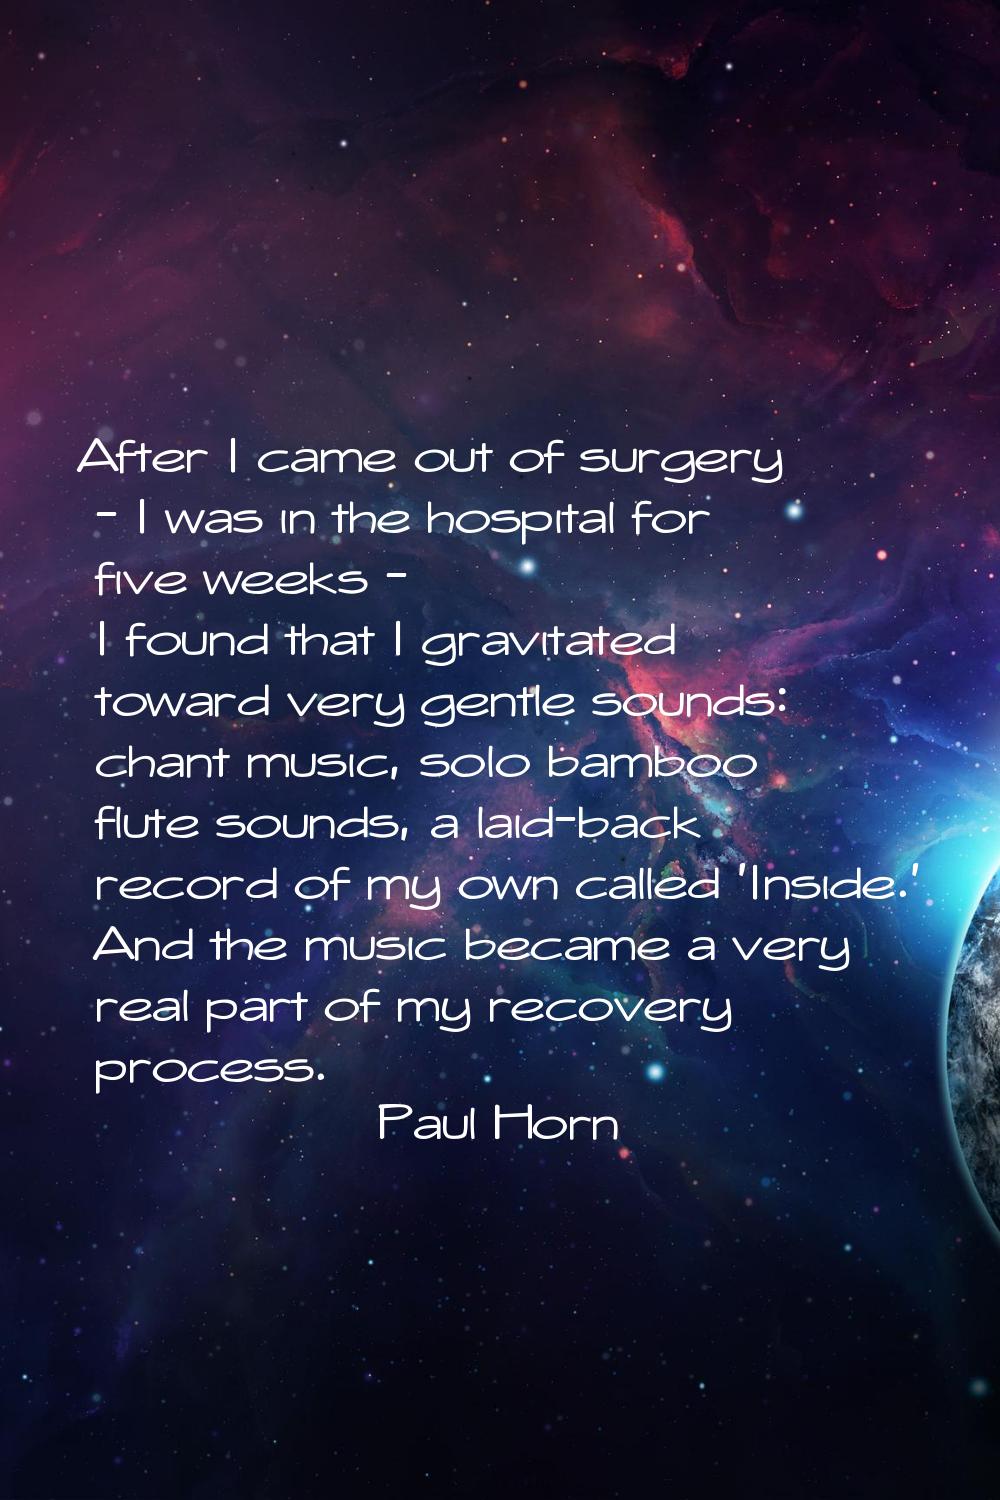 After I came out of surgery - I was in the hospital for five weeks - I found that I gravitated towa